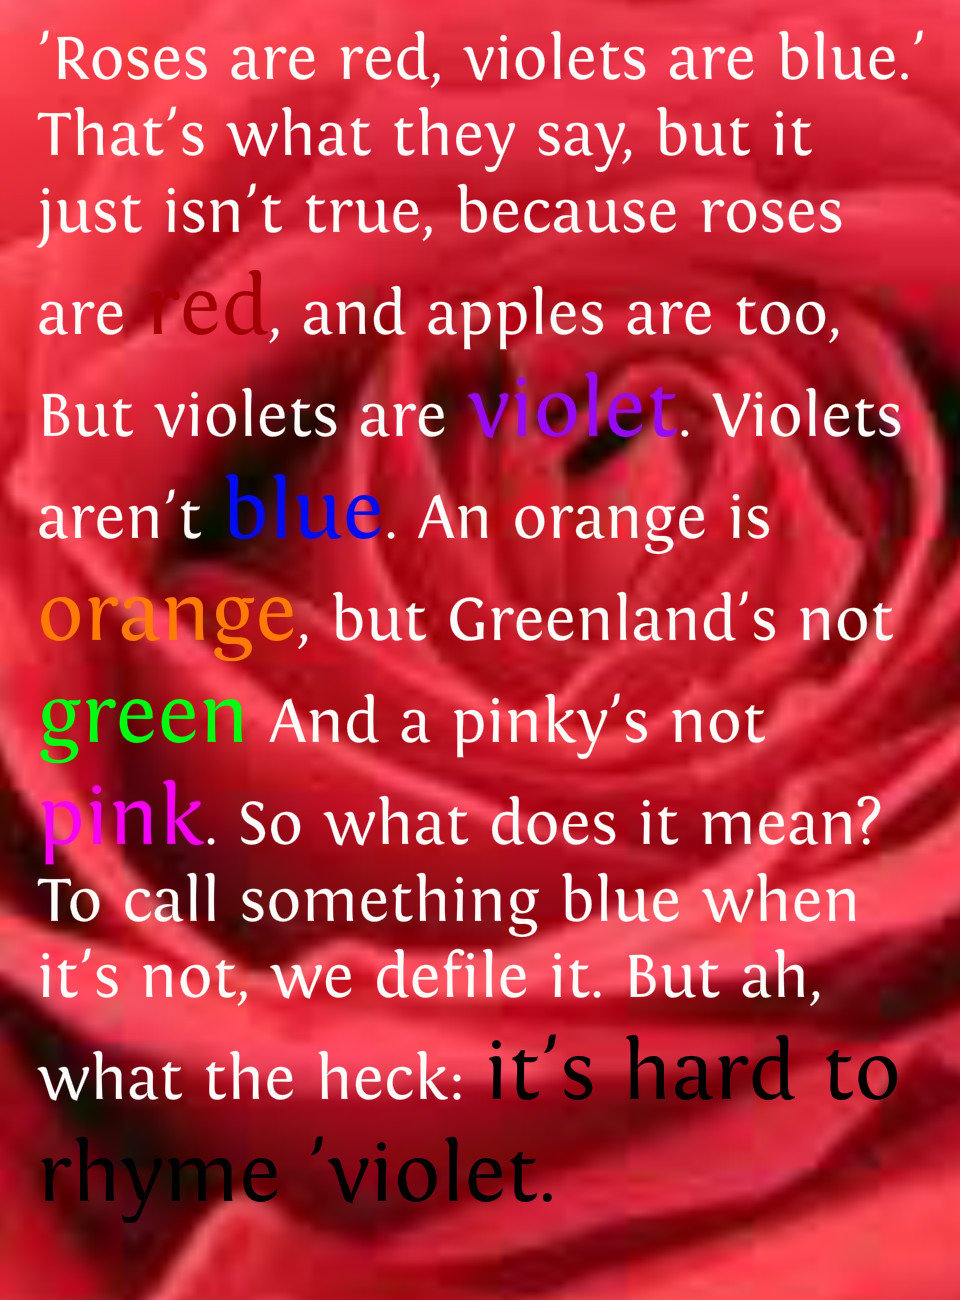 Roses Are Red Violets Are Blue Quotes. QuotesGram
